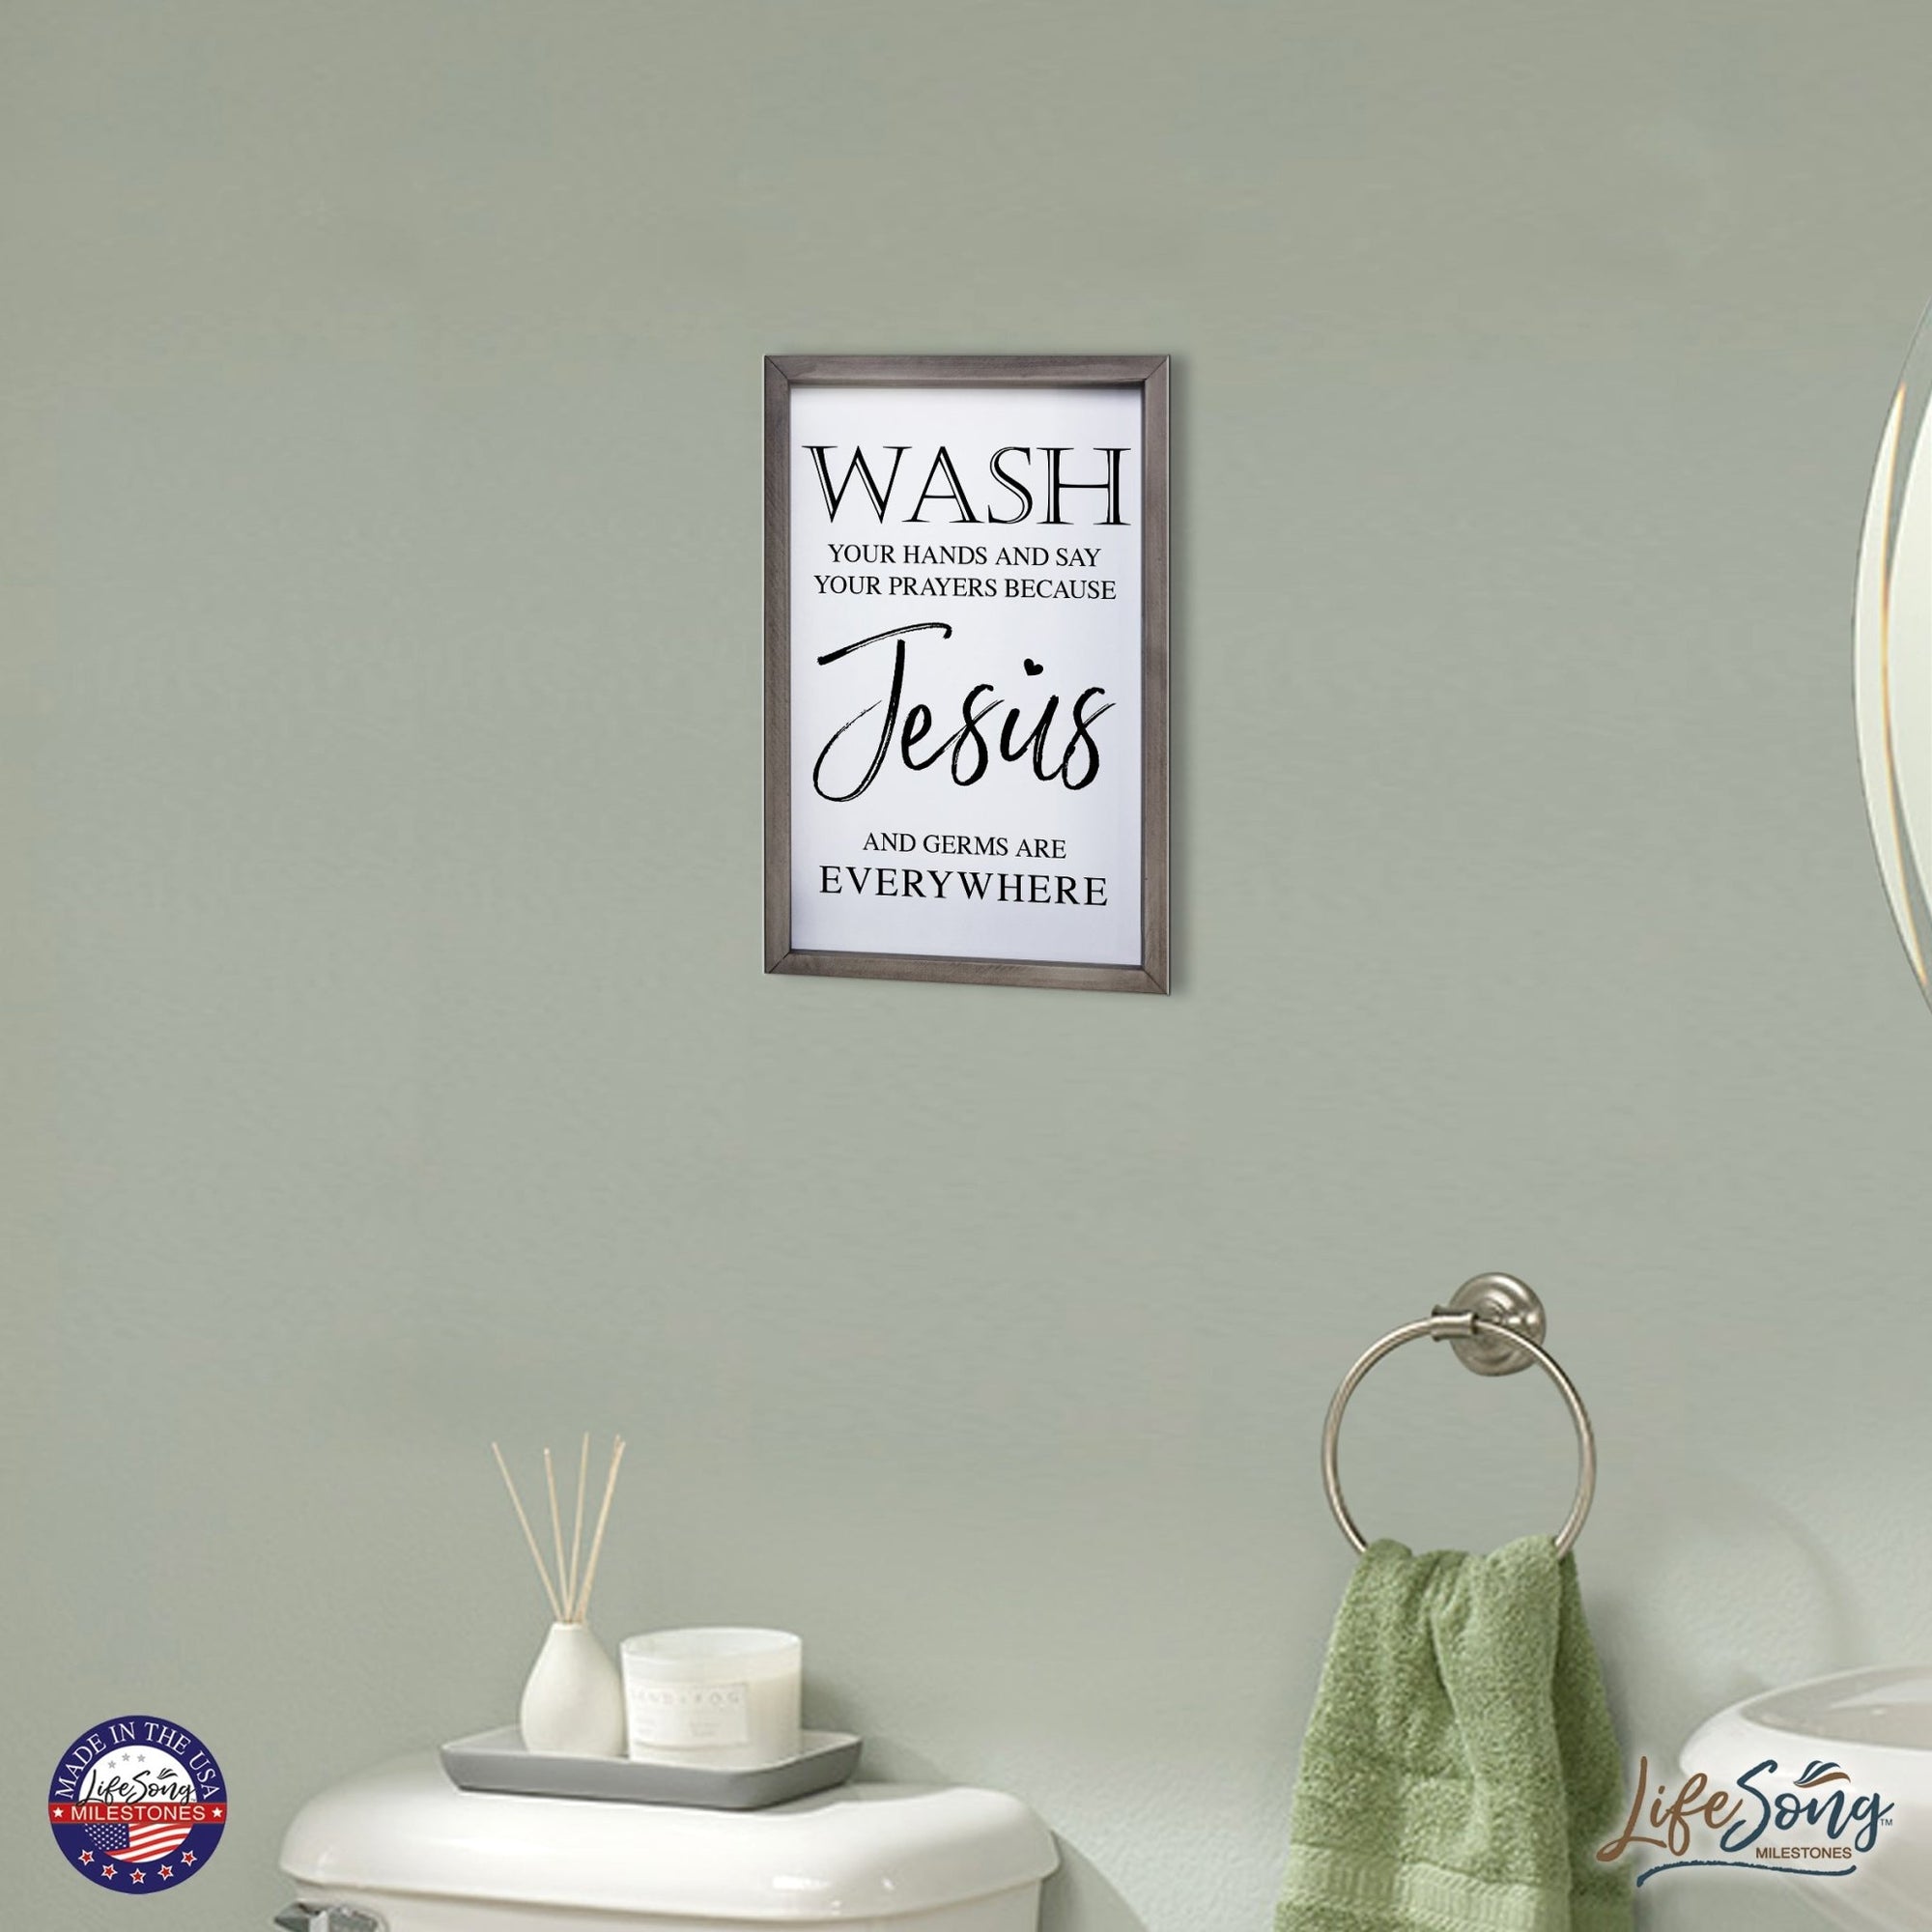 Funny Bathroom Decor Framed Shadow Box 7x10in (Wash Your Hands Jesus) - LifeSong Milestones